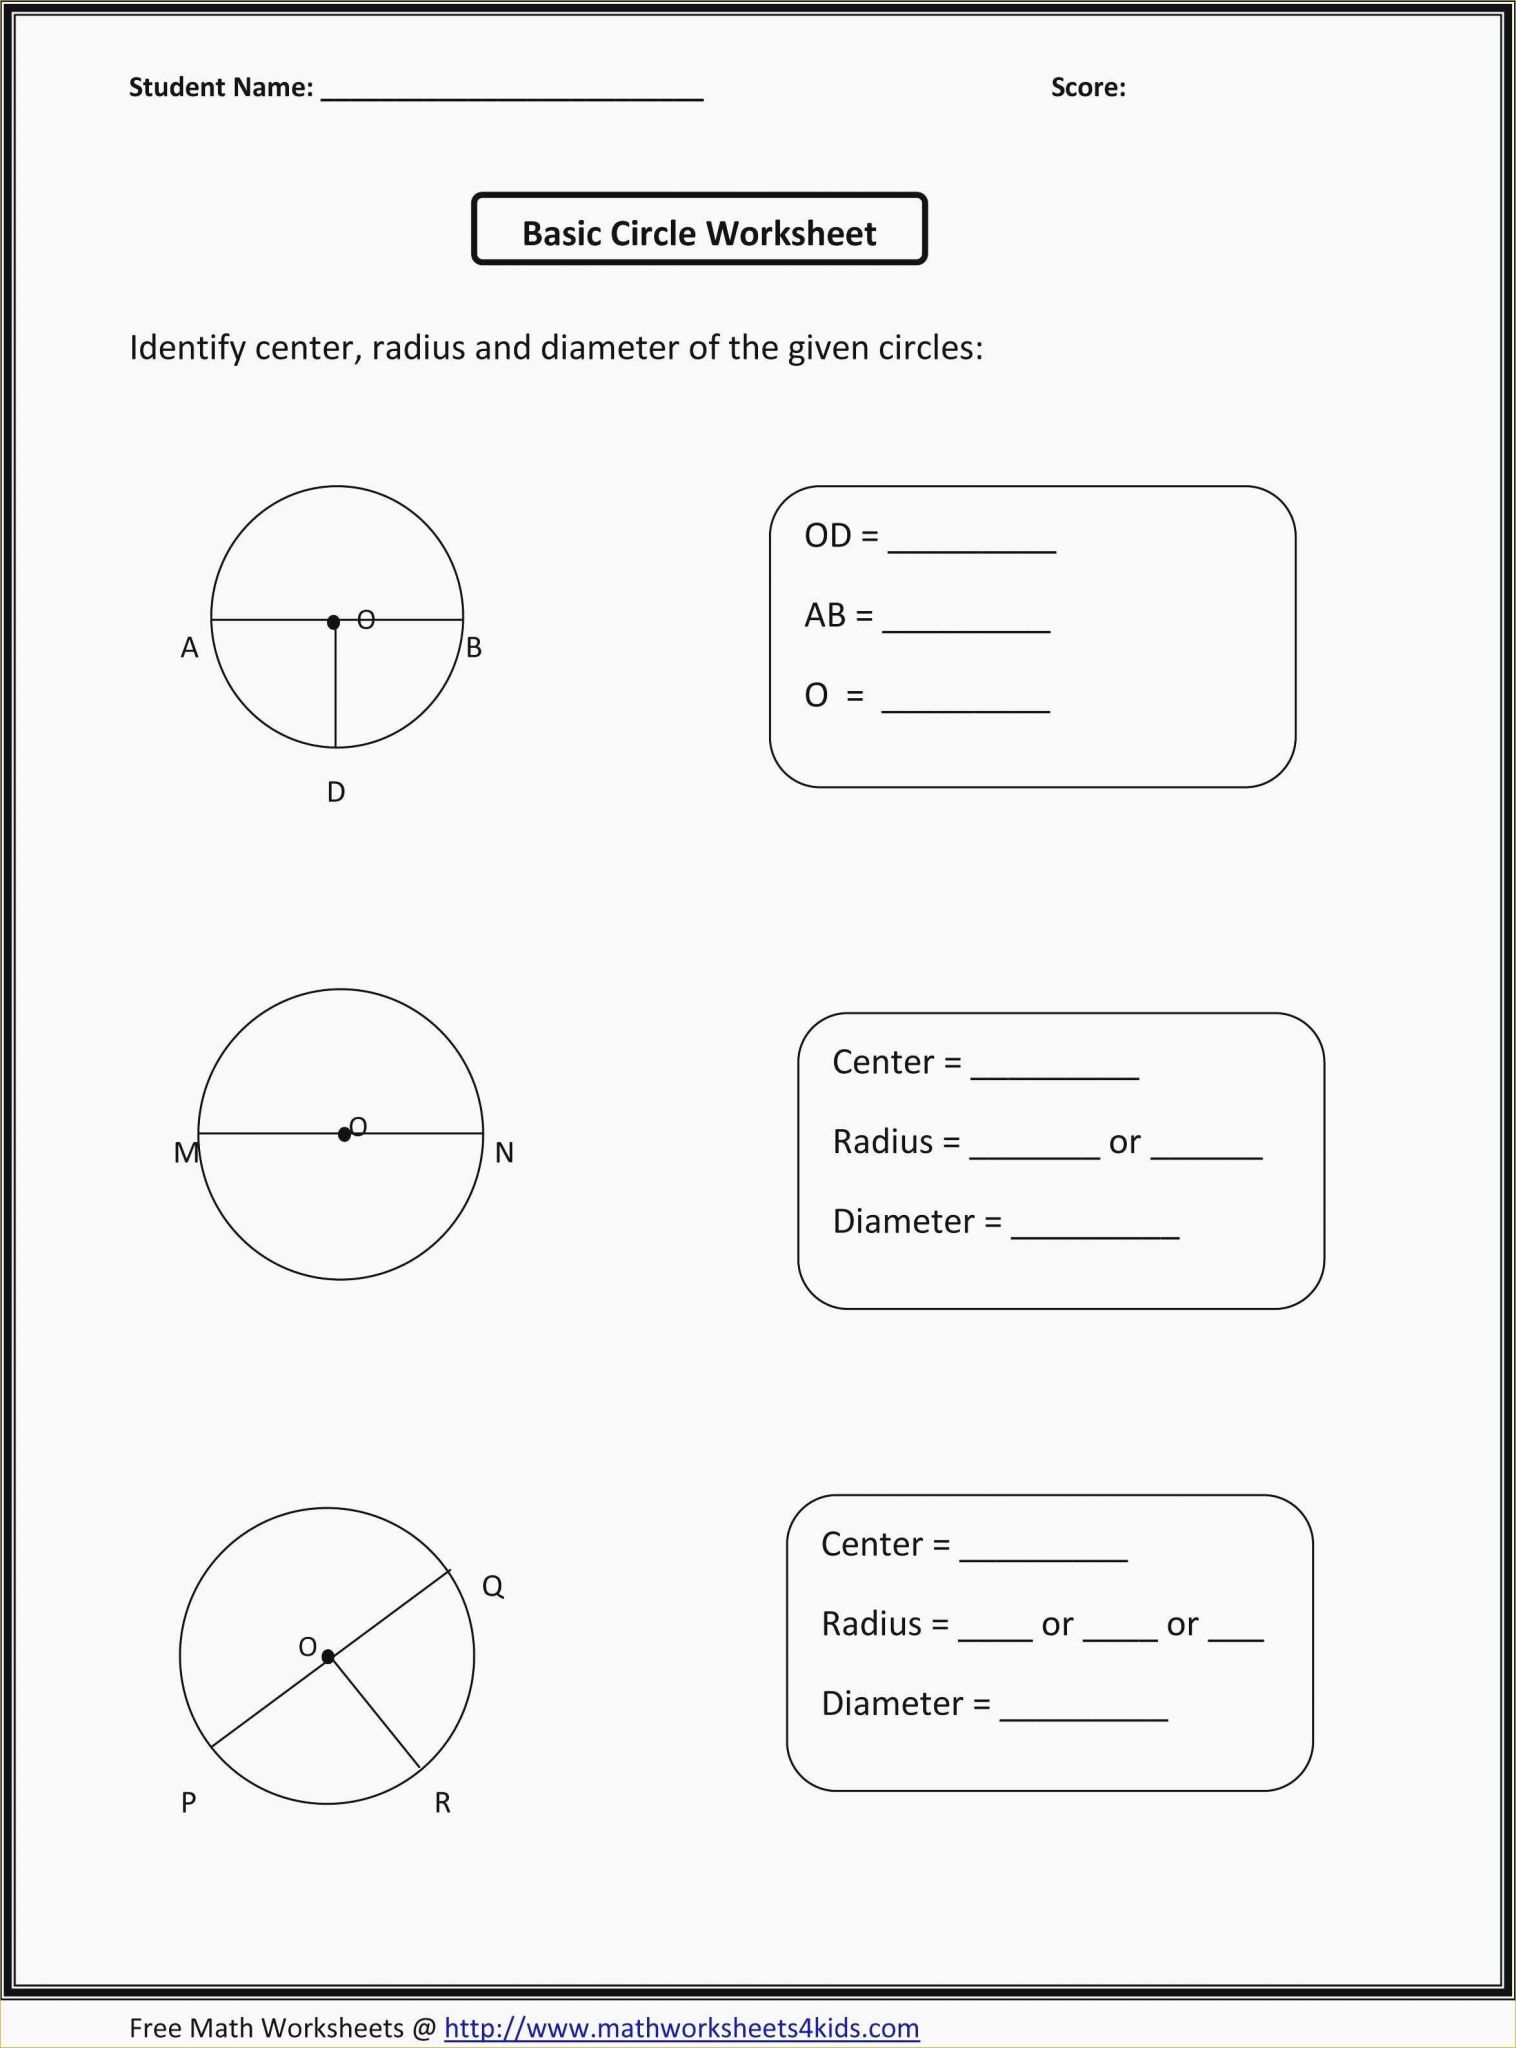 Osmosis Worksheet Answers together with Transport In Cells Worksheet Answers